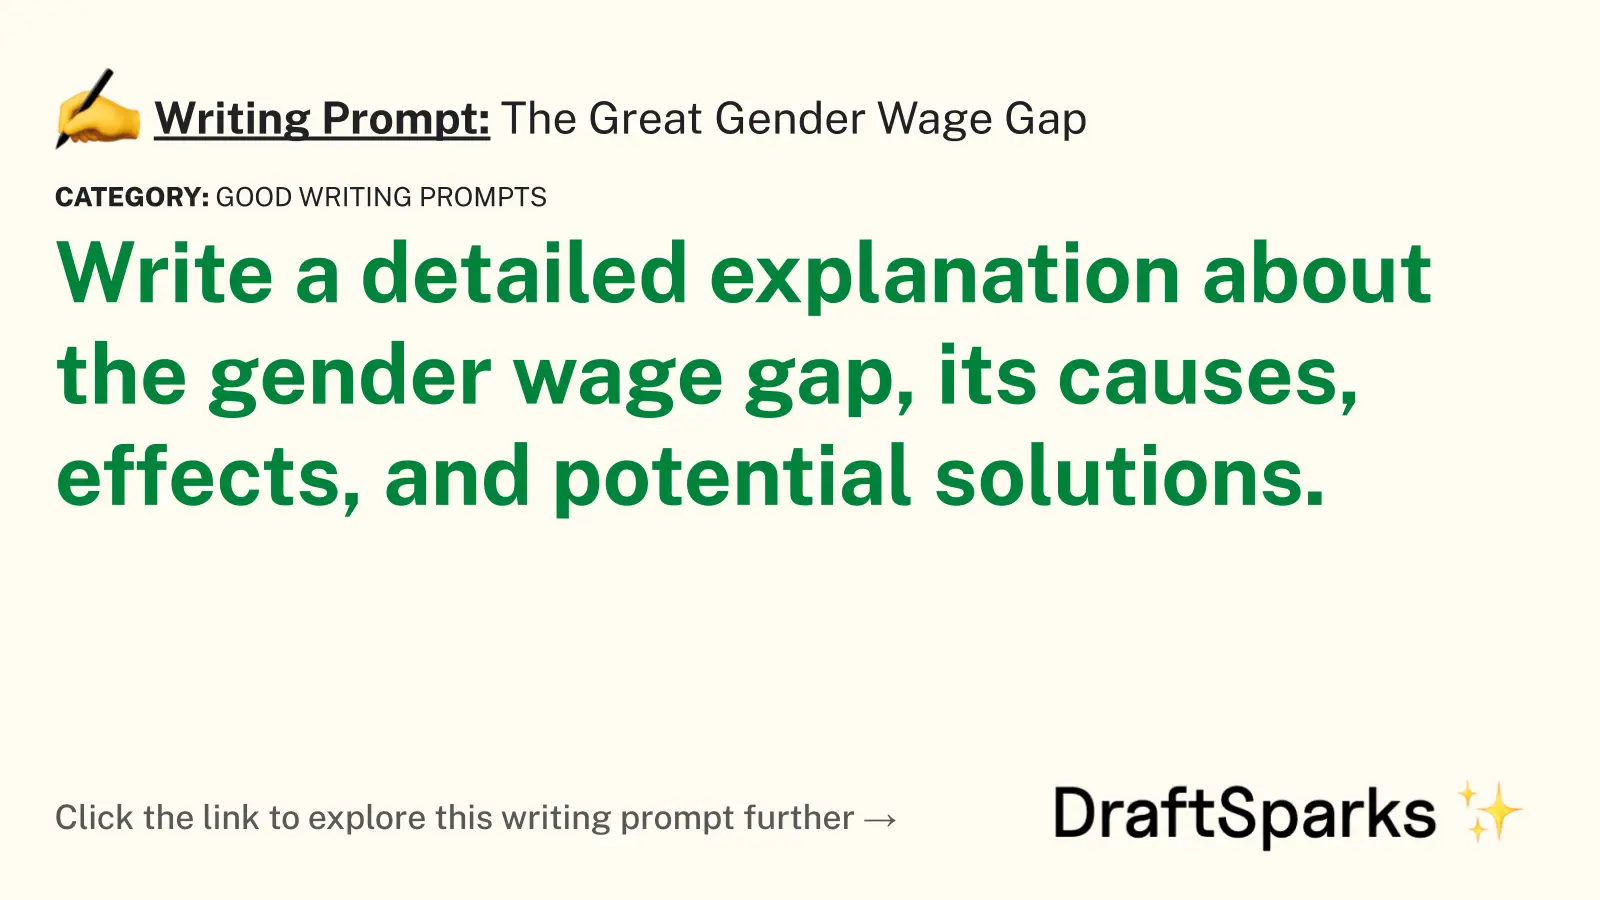 thesis statement for gender wage gap